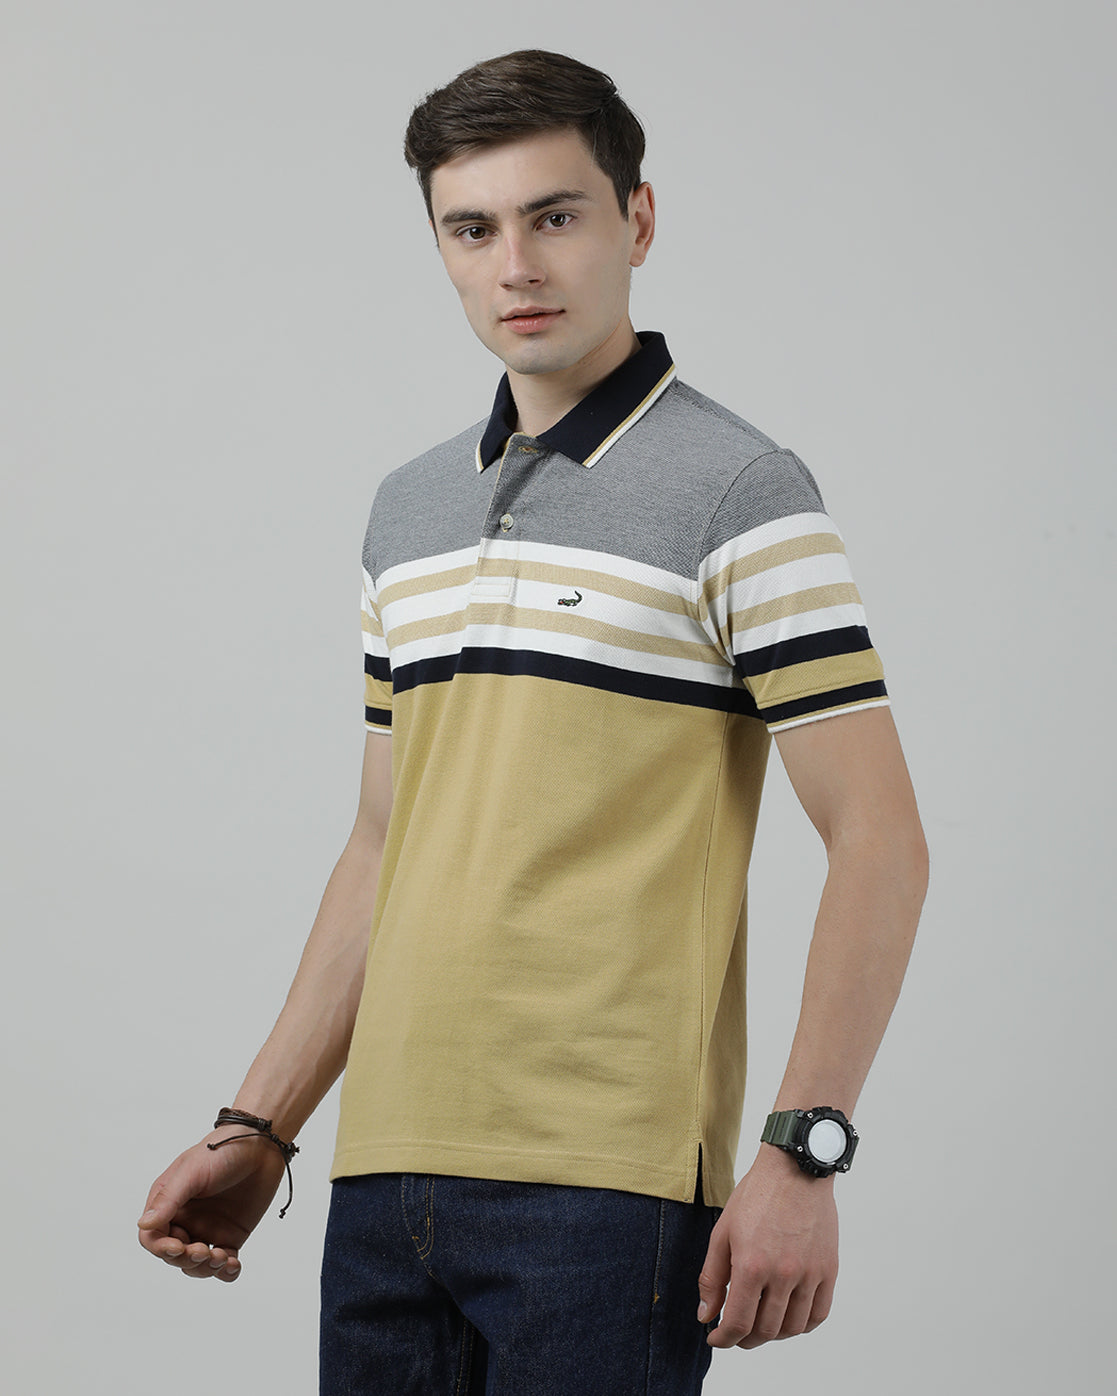 Casual Light Khaki T-Shirt Engineering Stripes Half Sleeve Slim Fit with Collar for Men